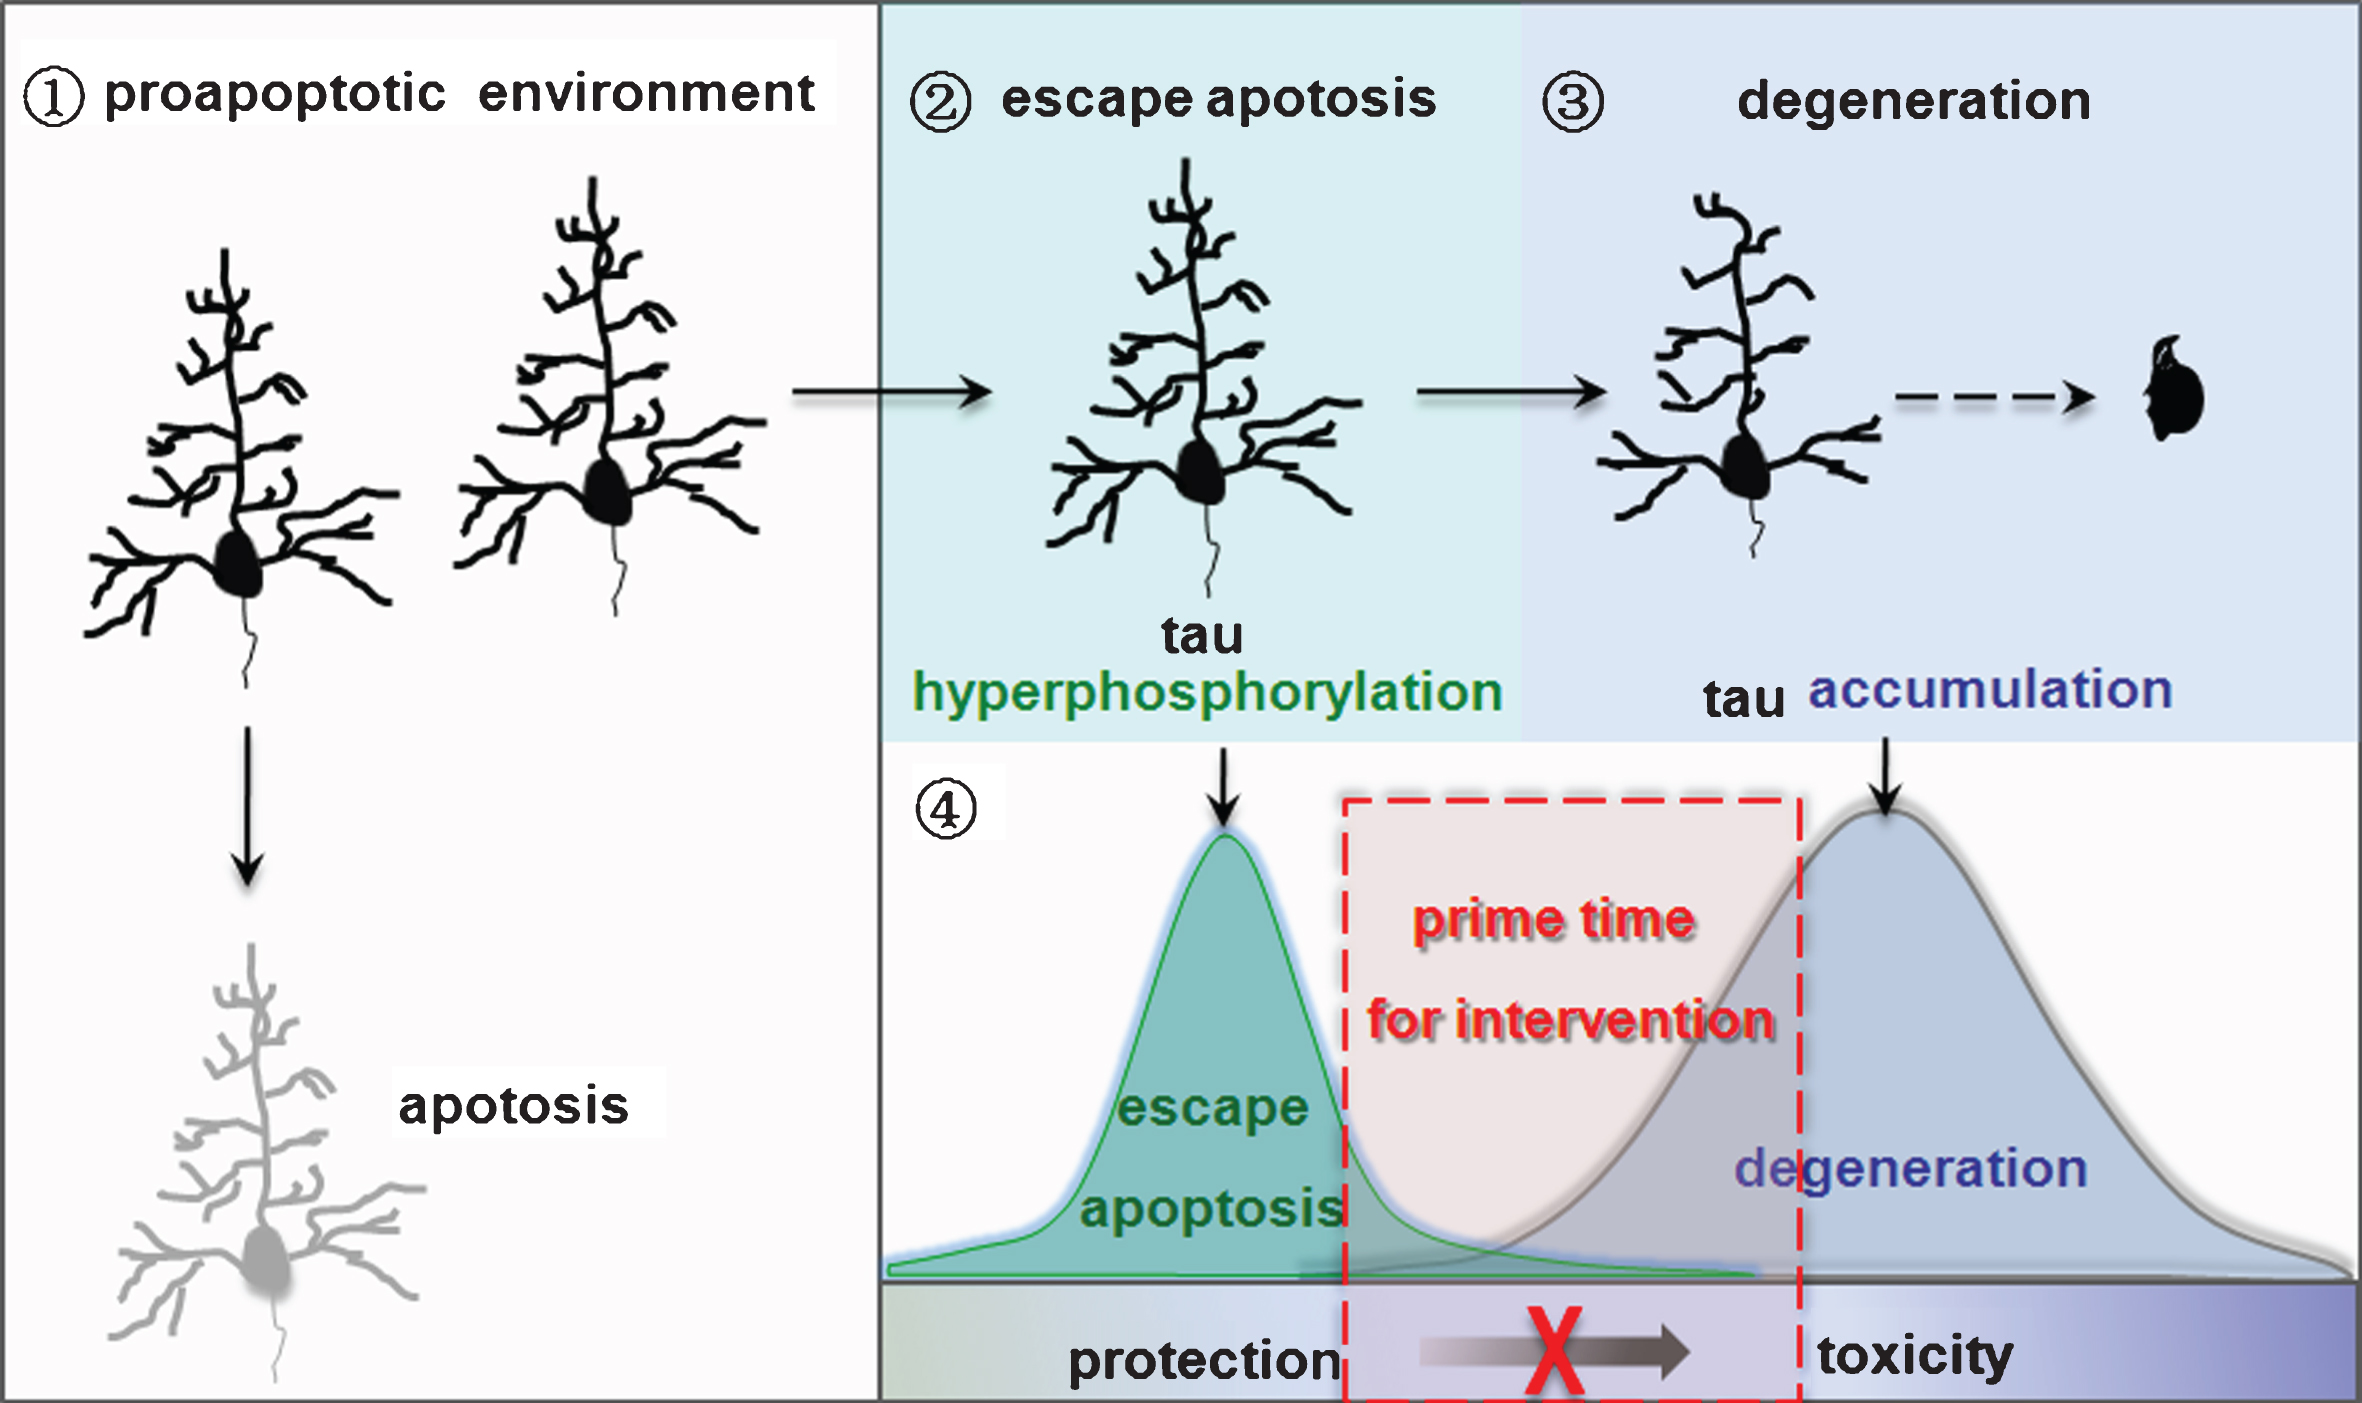 Nature of neurodegeneration and the implication in intervention. ➀Neurons lacking tau hyperphosphorylation enter apoptosis in a pro-apoptotic environment. ➁Tau hyperphosphorylation allows neurons to escape apoptosis. ➂Neurons that escape apoptosis go through degeneration with the increasing accumulation of hyperphosphorylated tau. ➃Targeting tau accumulation may prohibit neurodegeneration in AD and other tauopathies.